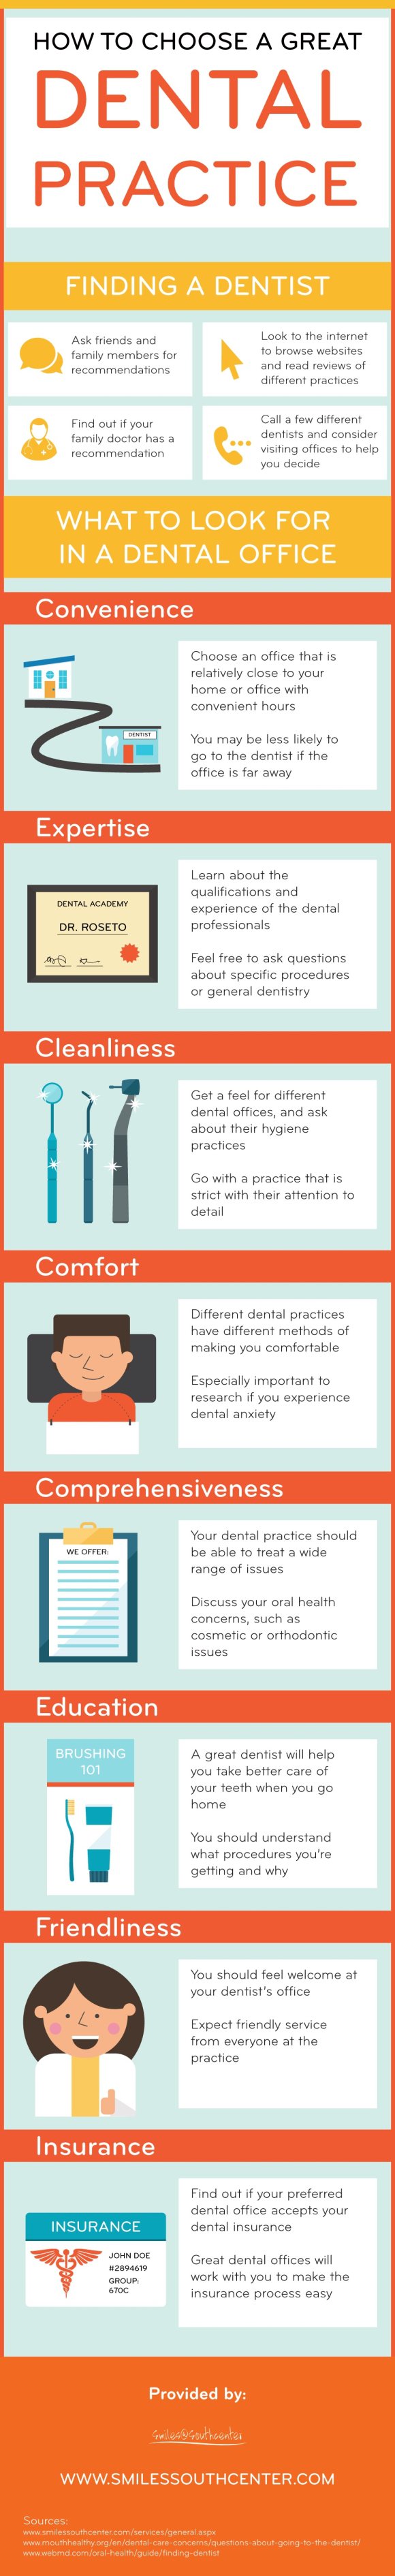 How to choose a great dental practice